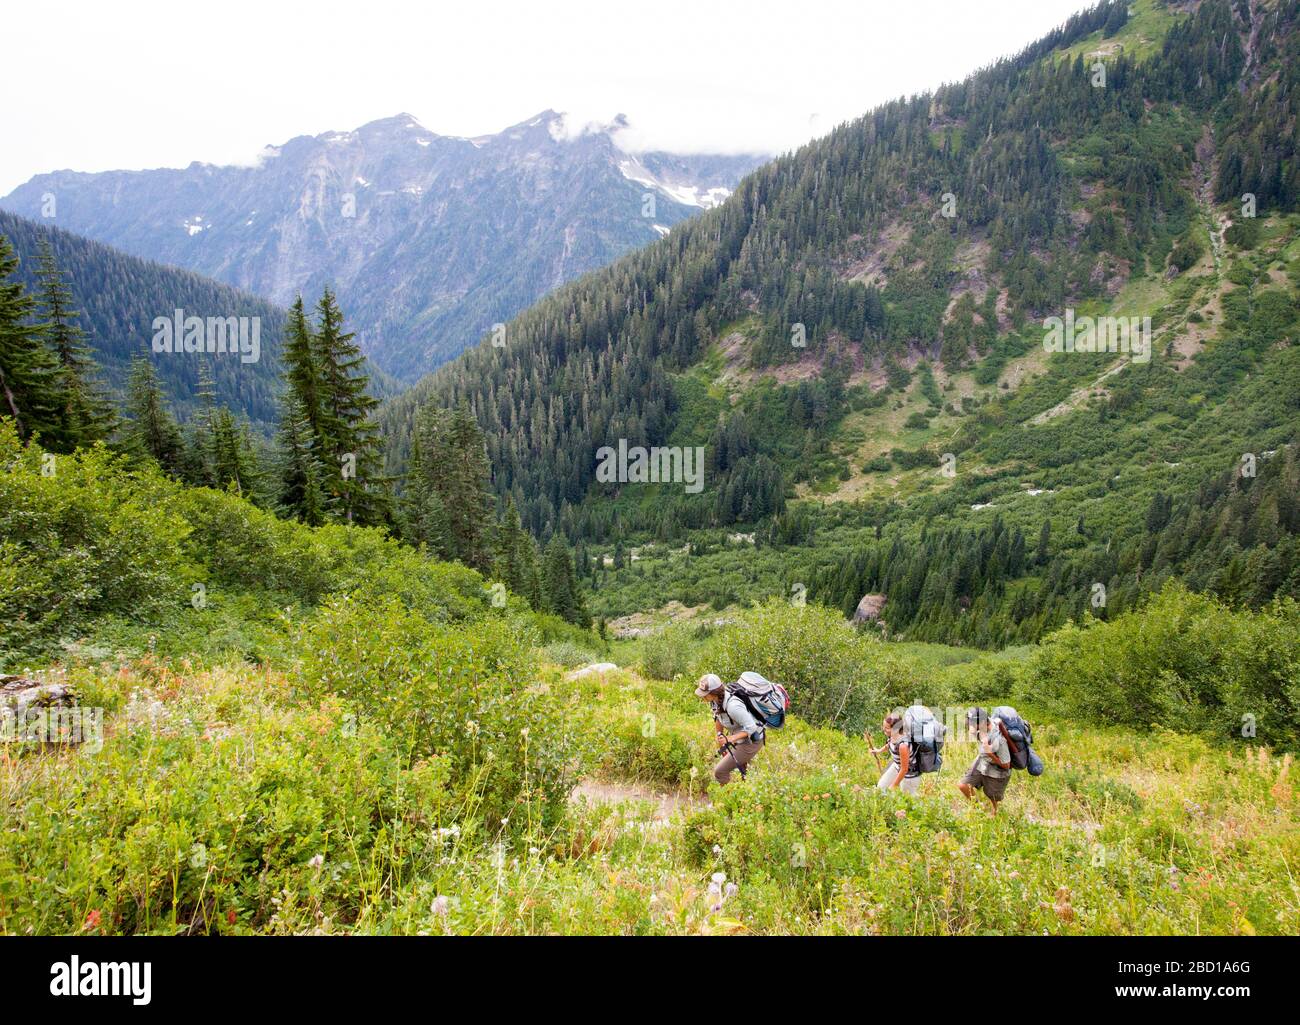 Two female and one male backpacker walk a path on a mountainside with evergreen trees in the background. Stock Photo